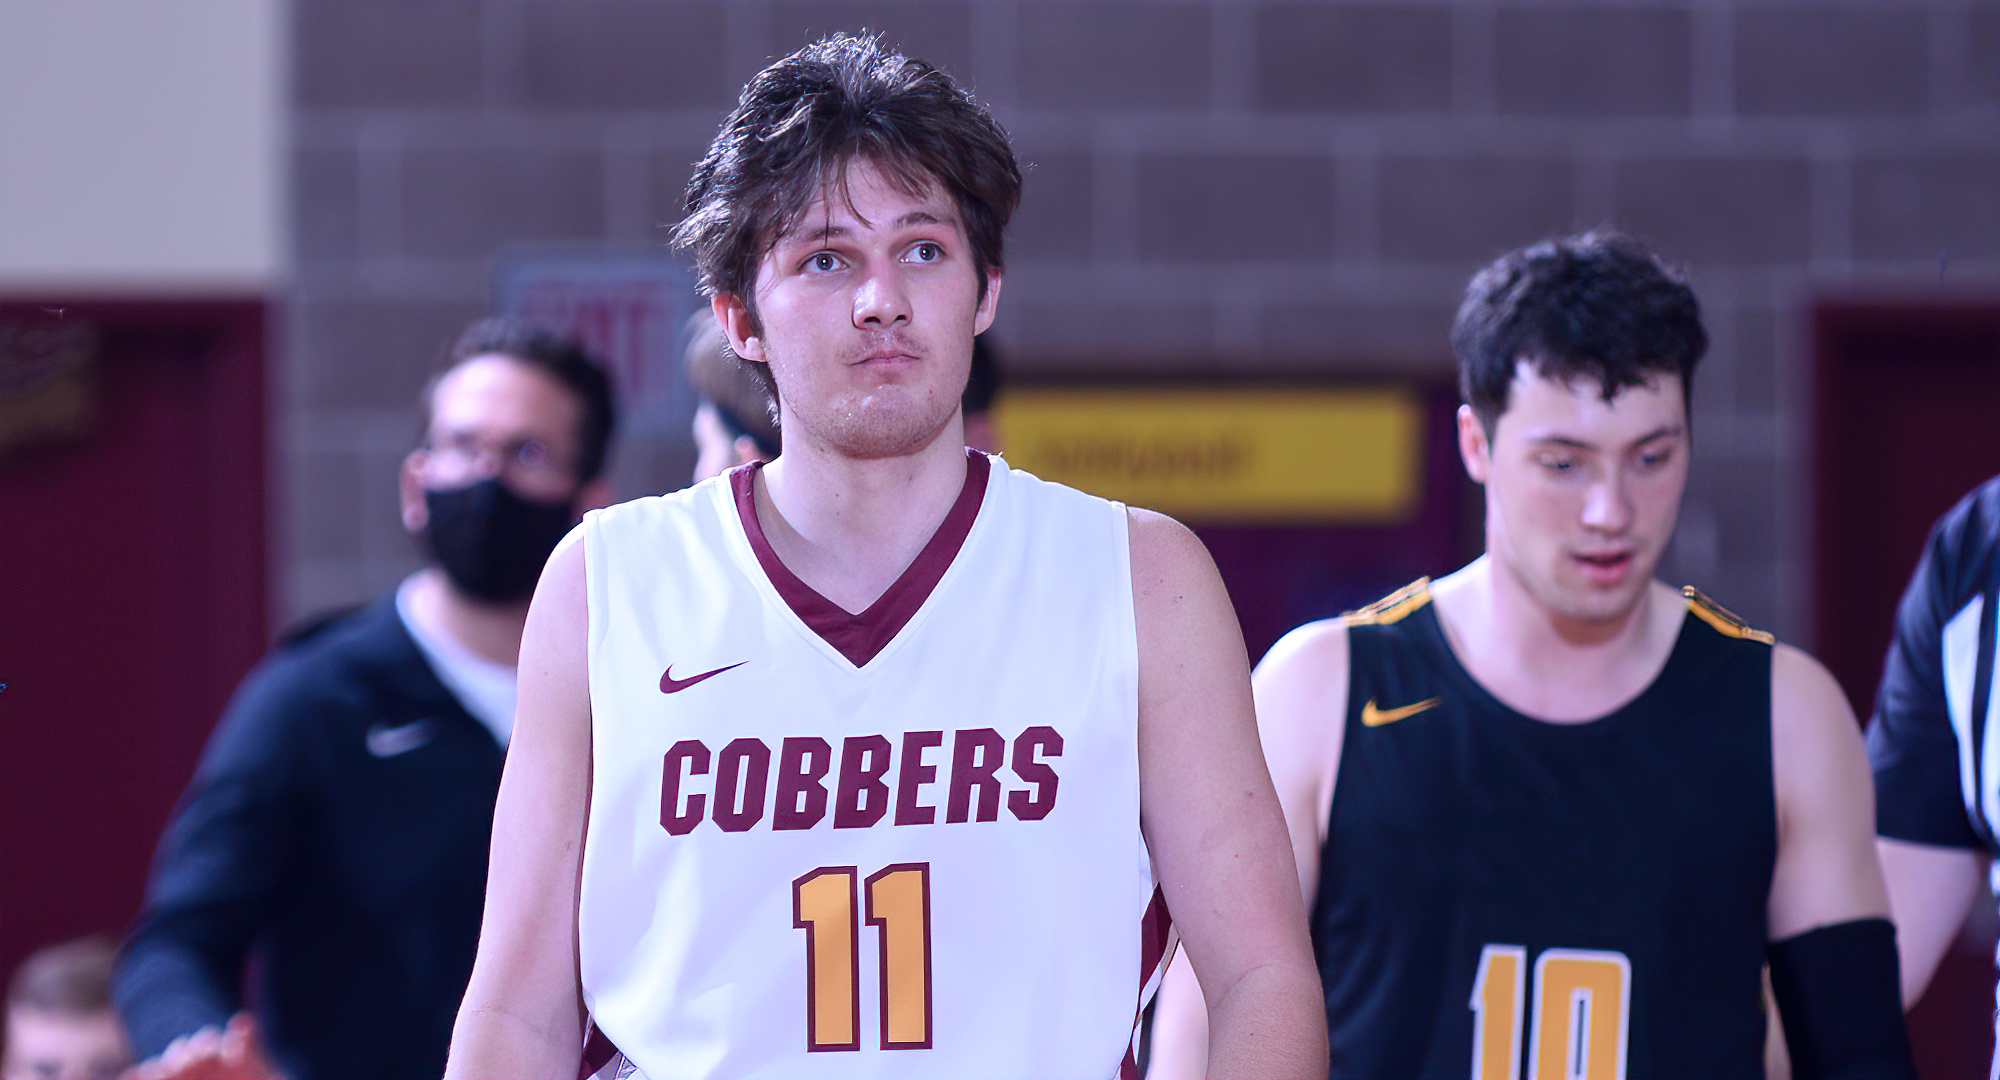 Braeton Motschenbacher came through with a team-high 20 points and grabbed eight rebounds in the Cobber's seaosn opener at UM-Morris.